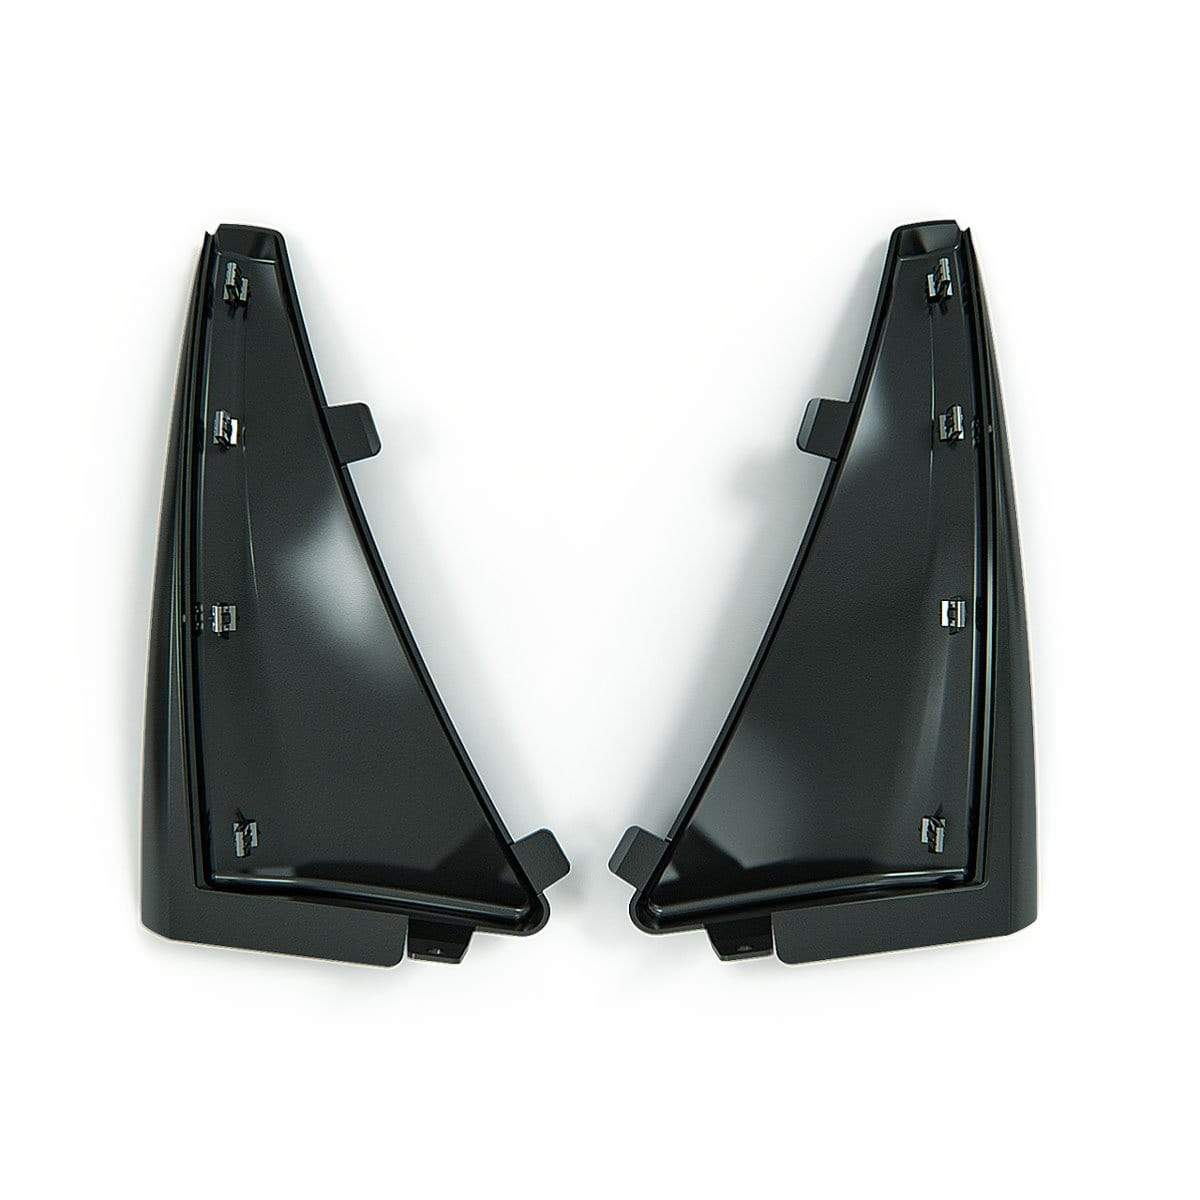 ACS C8 Rock Guards in Carbon Flash Black [50-4-041|50-4-043]CFZ - Front and Rear View. Easy to install, no drilling required. Protects your C8 Corvette from rock chips. Optional trim tool set available.